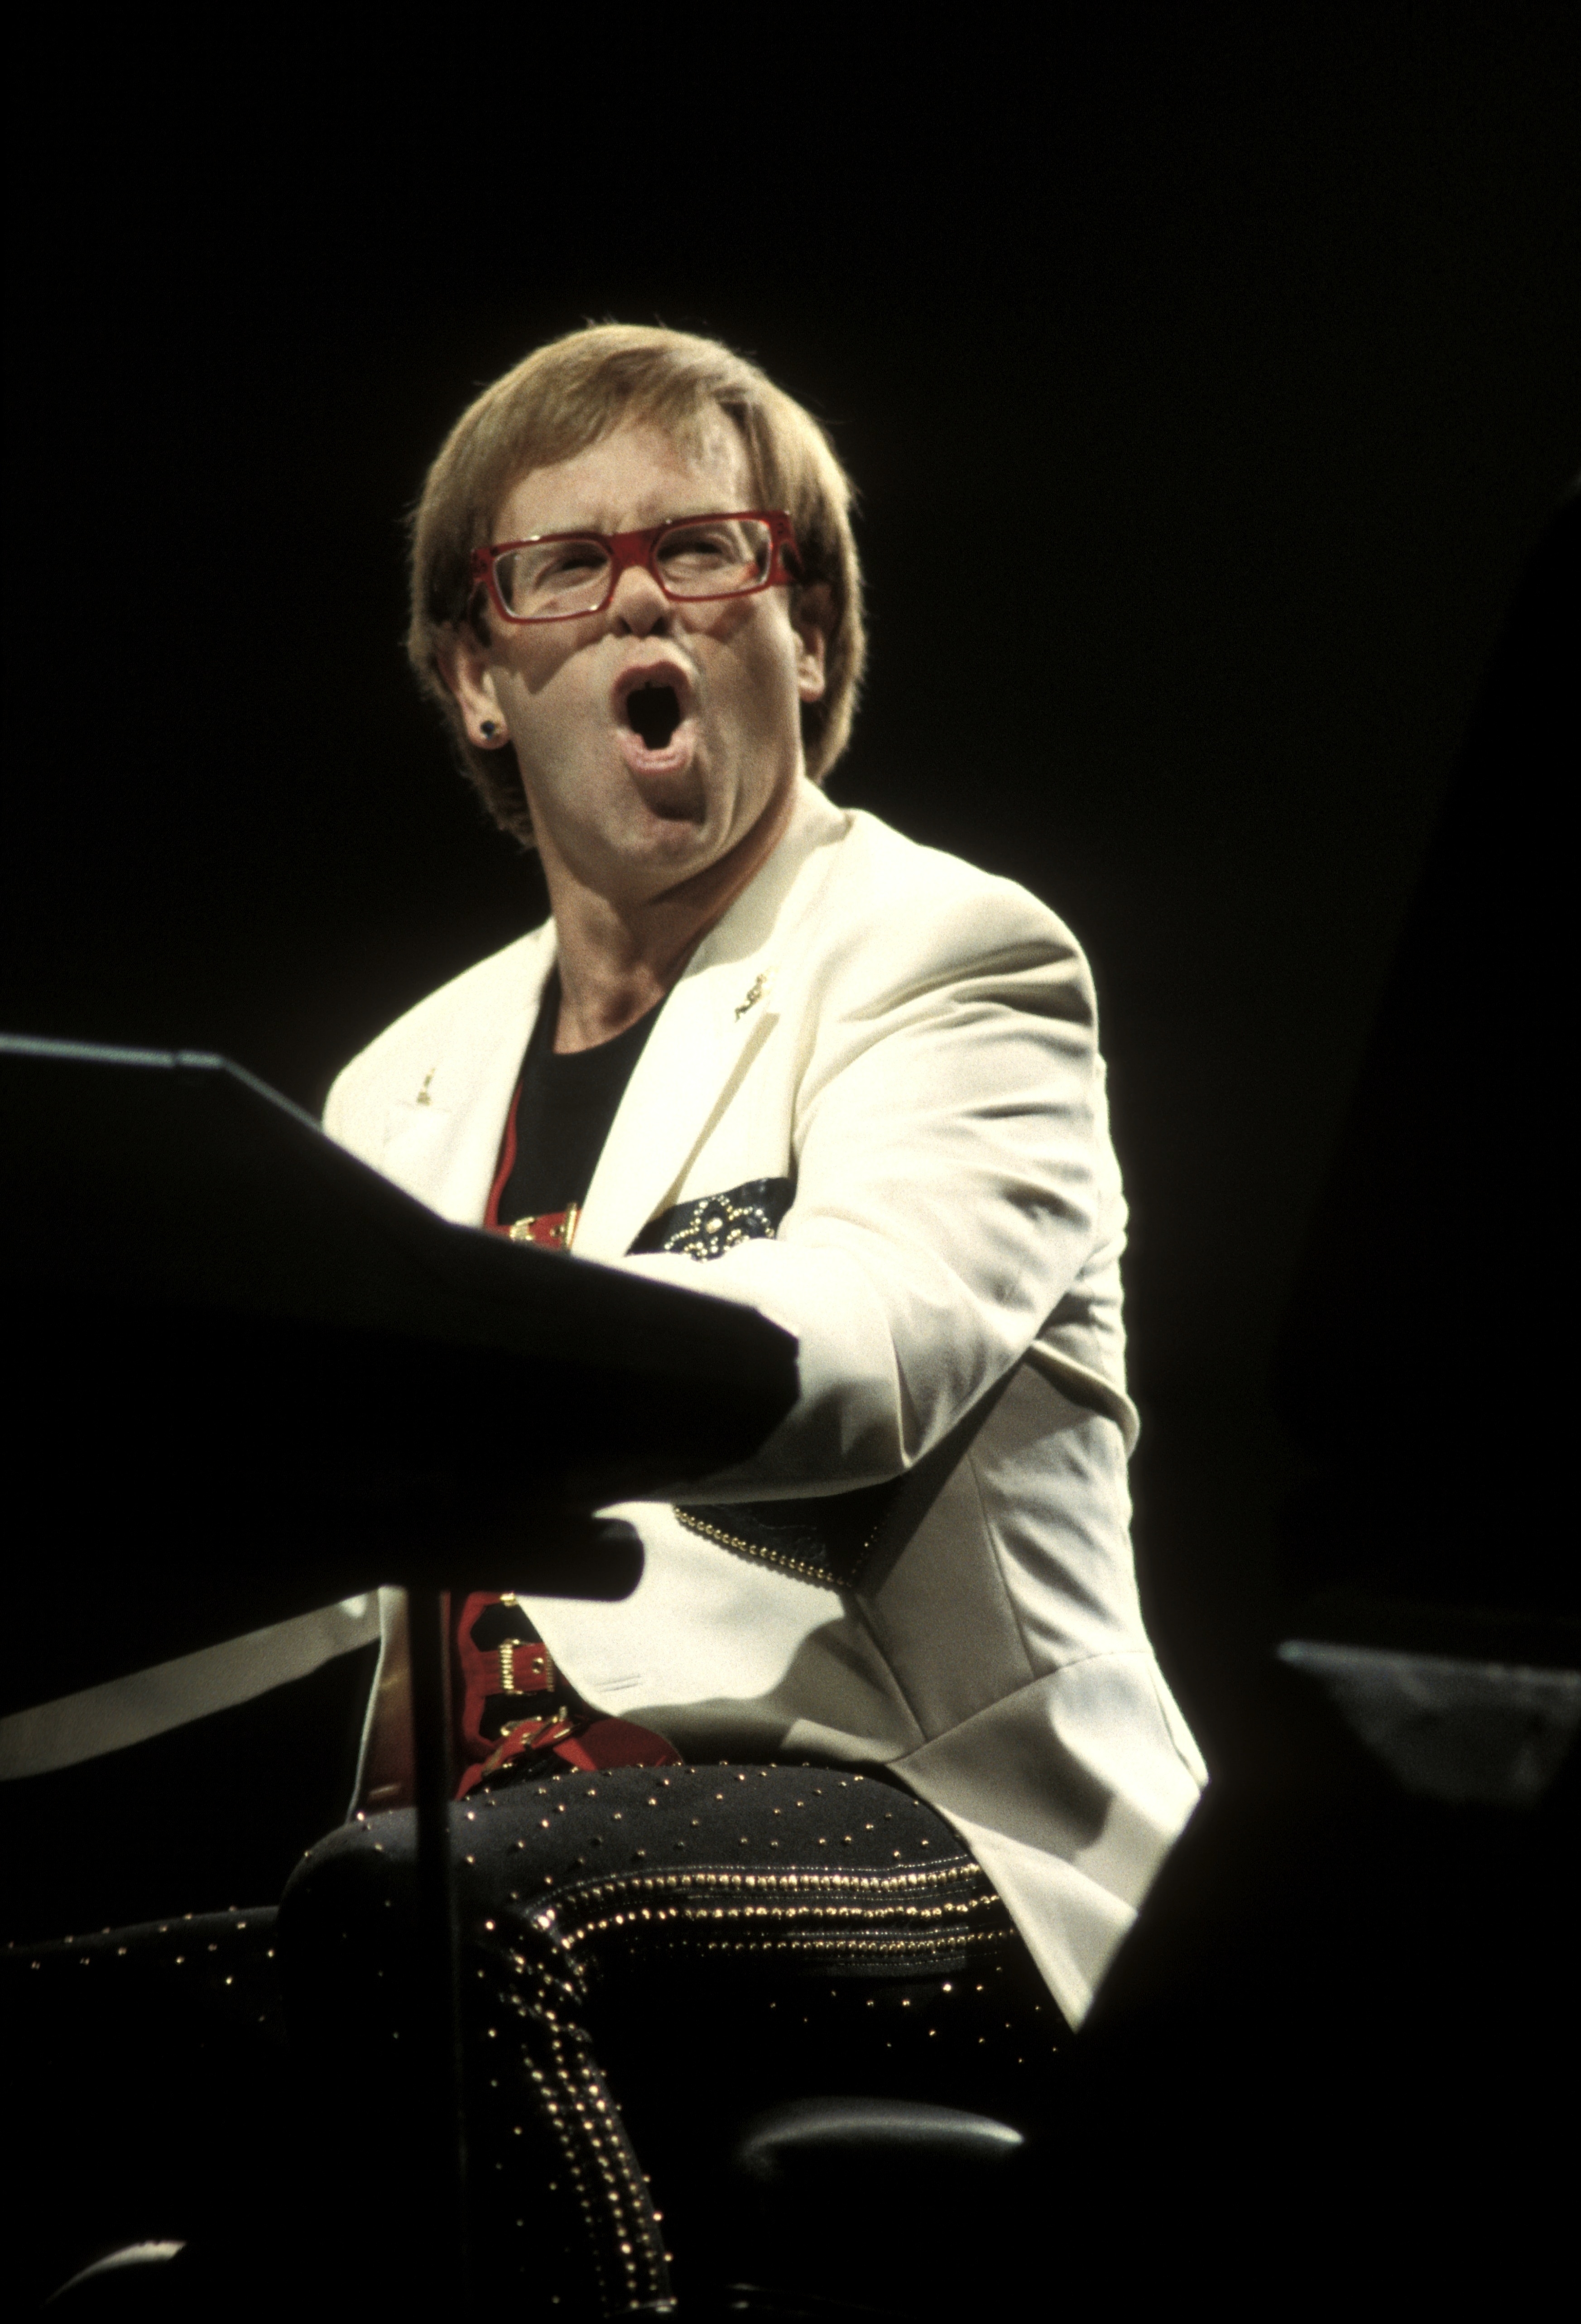 Elton John in performance attire at the piano, singing with emotion